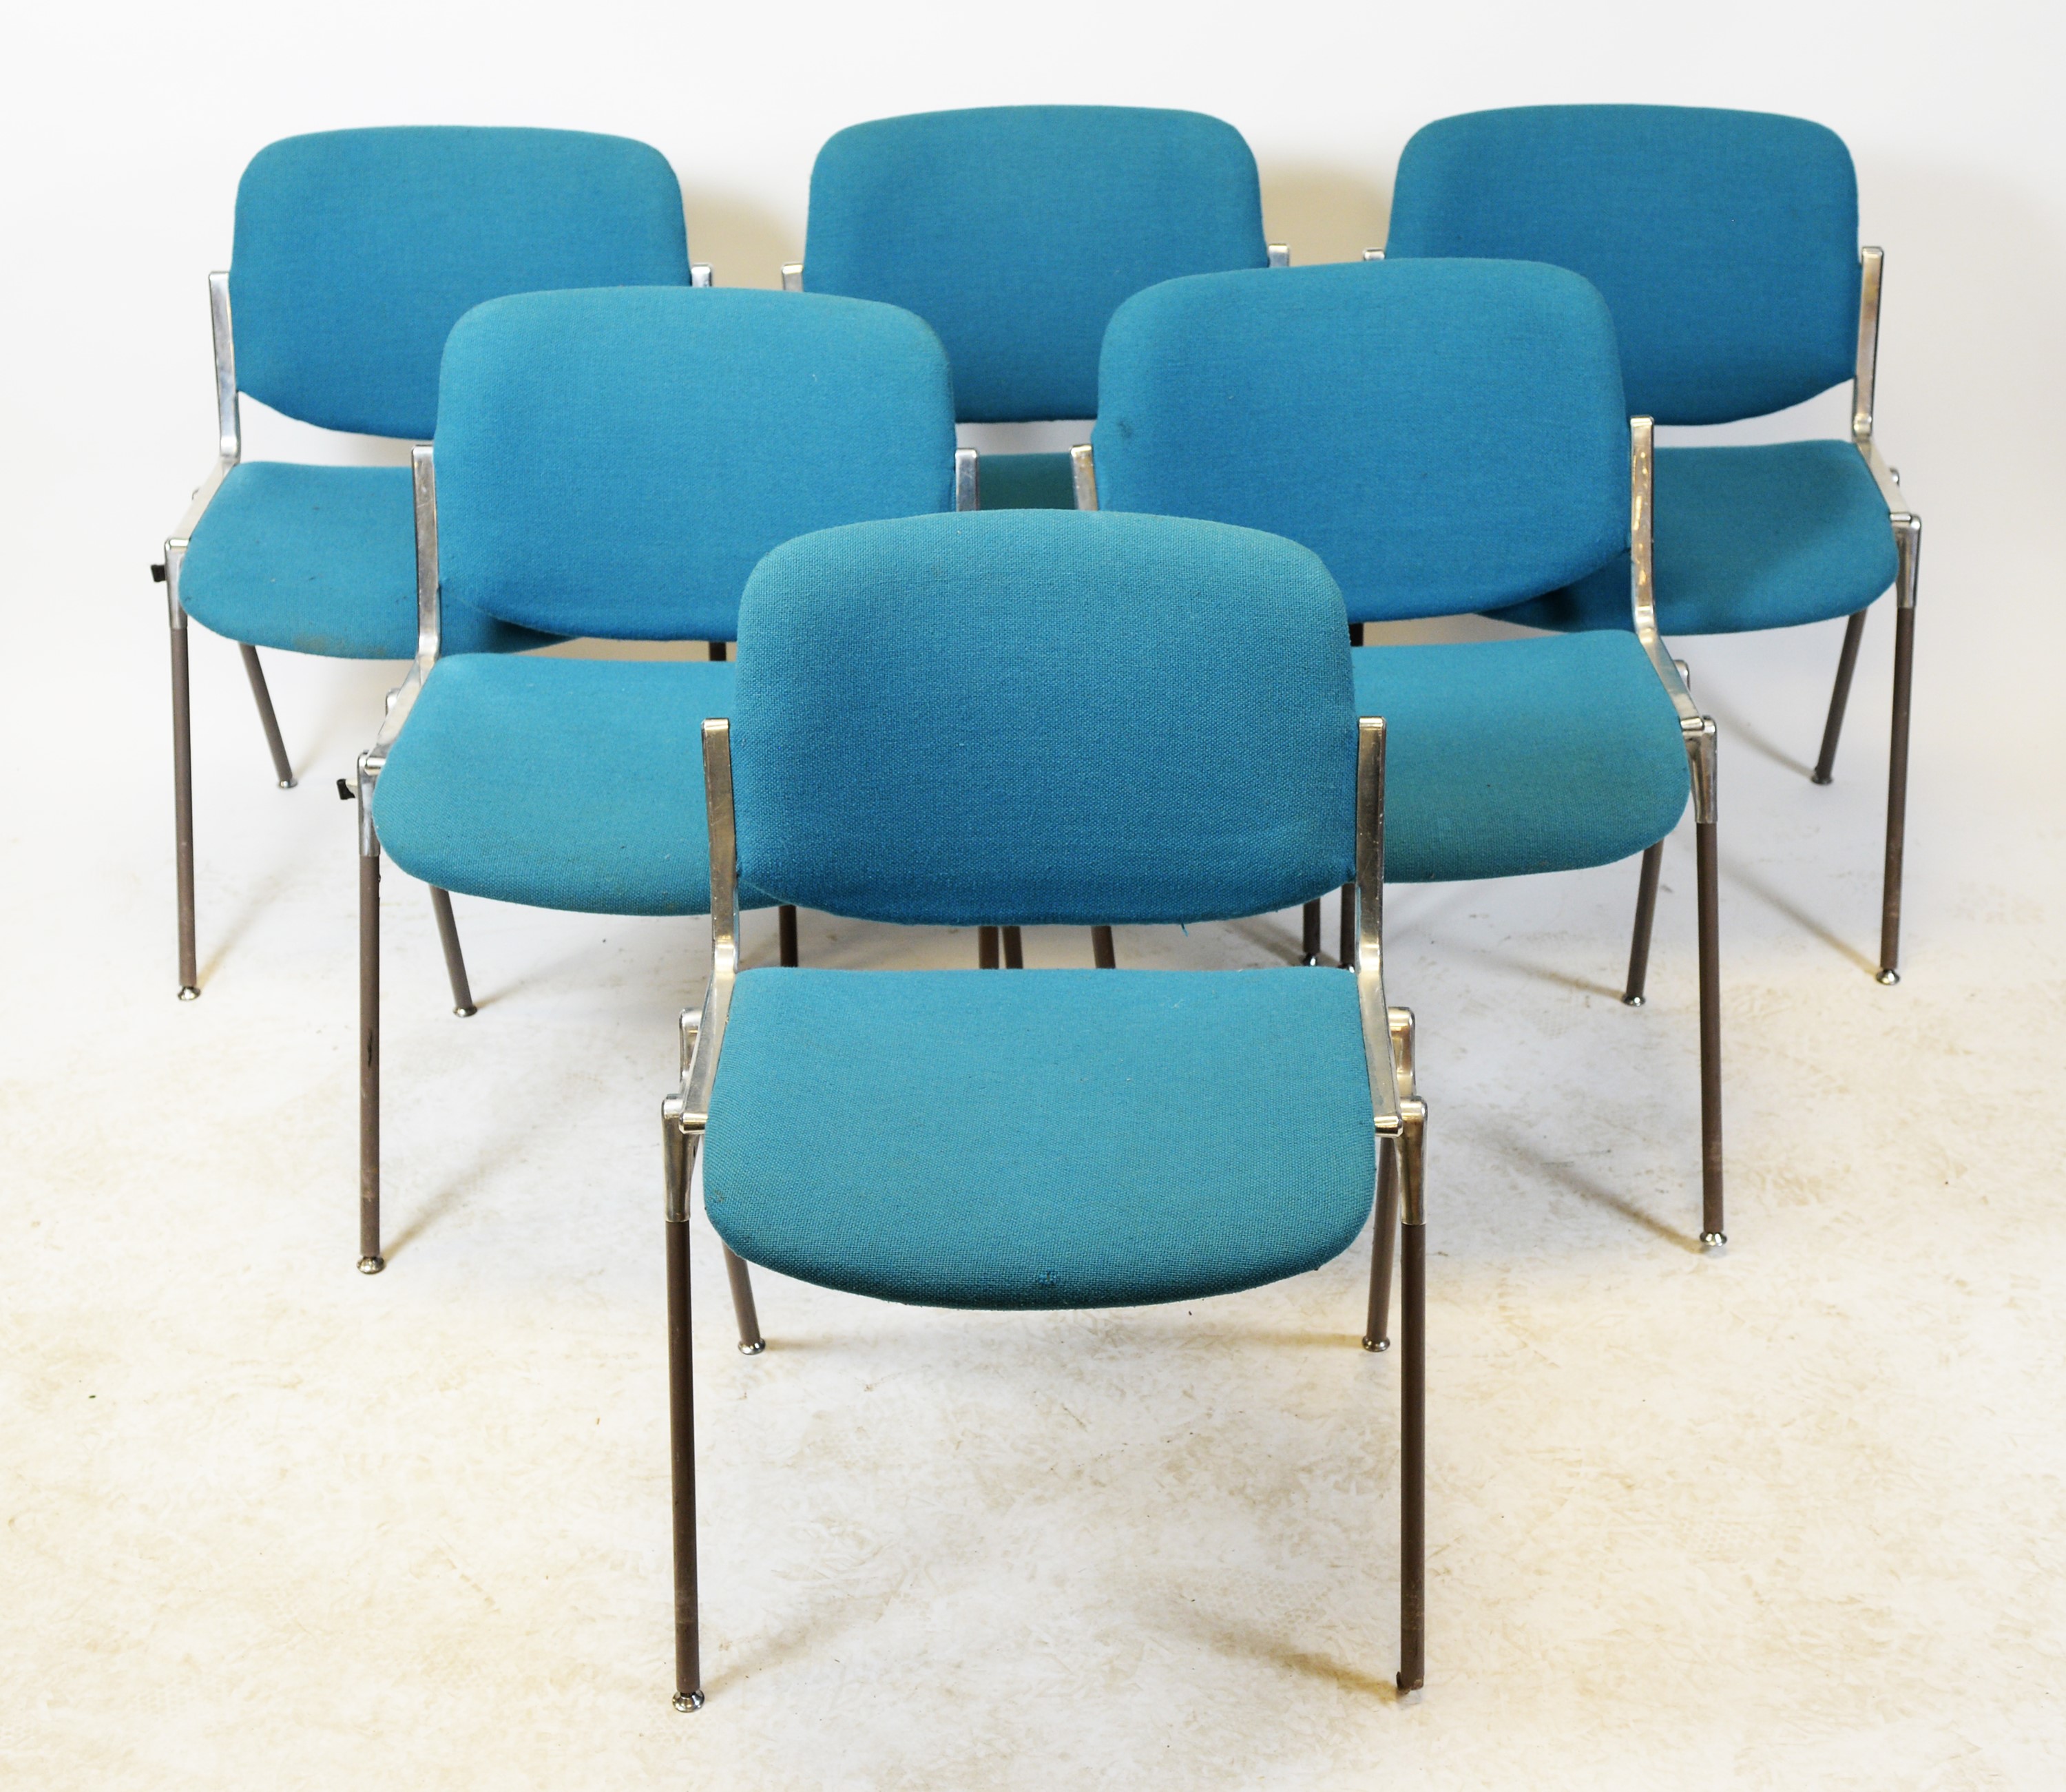 Giancarlo Piretti For Castelli - six DSC, Axis 106 stacking chairs